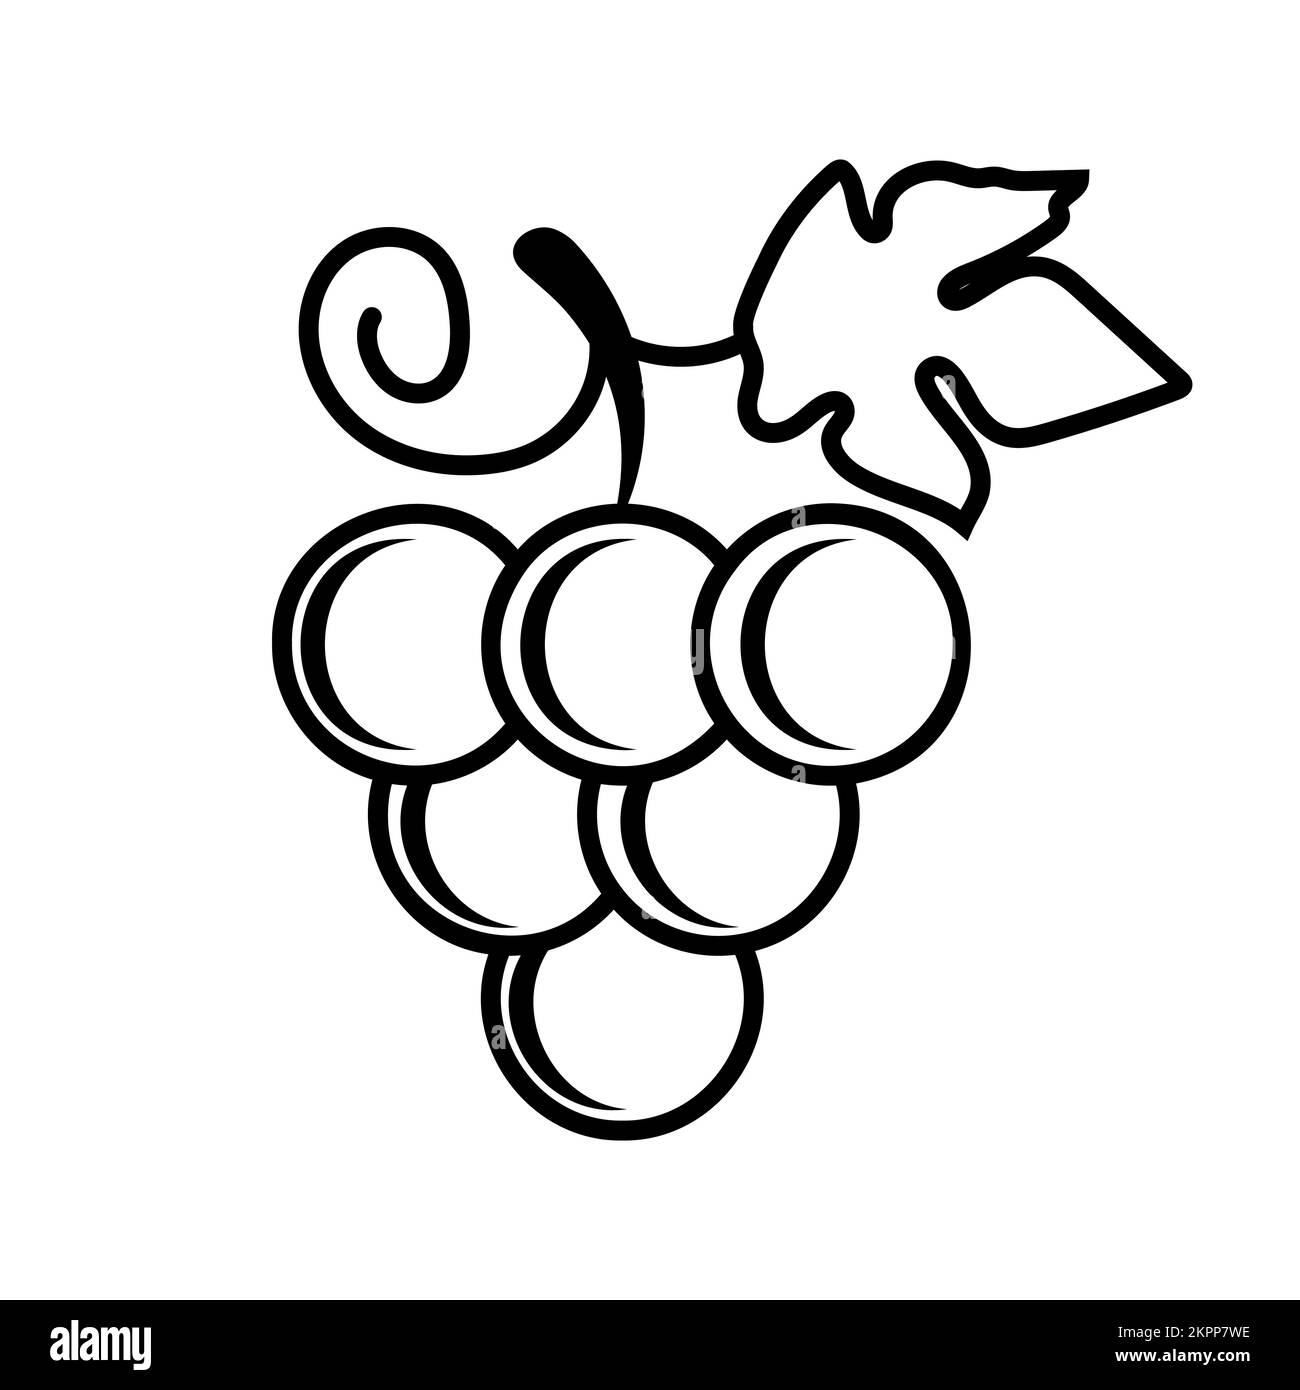 Grapes line icon. Design for web and mobile app. Vector illustration isolated on white background Stock Vector